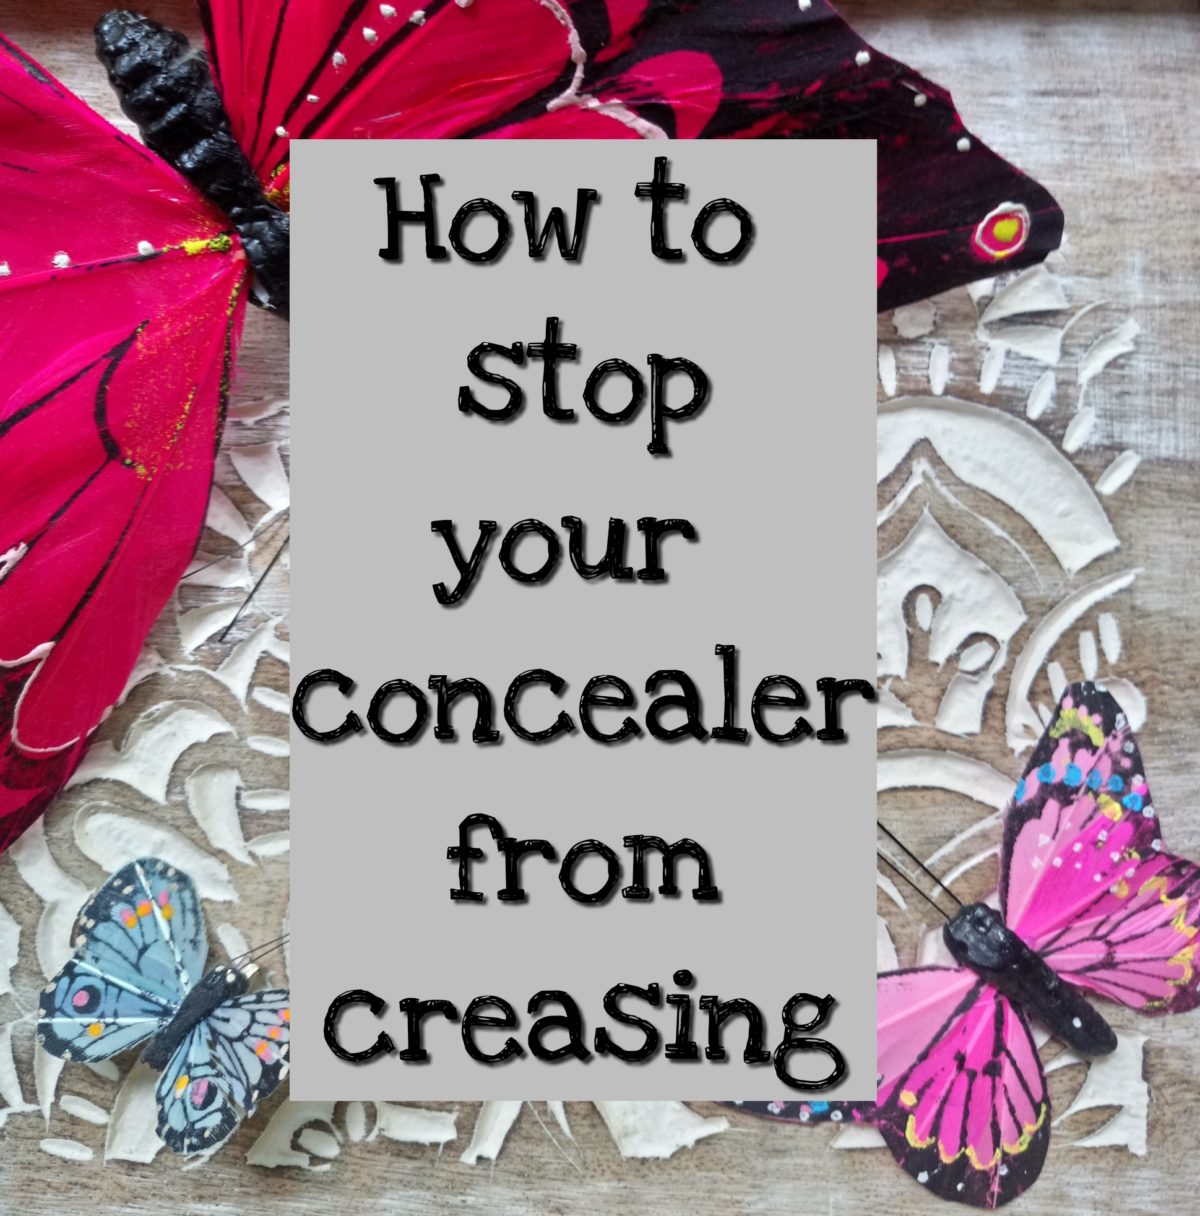 How To Stop Your Concealer From Creasing